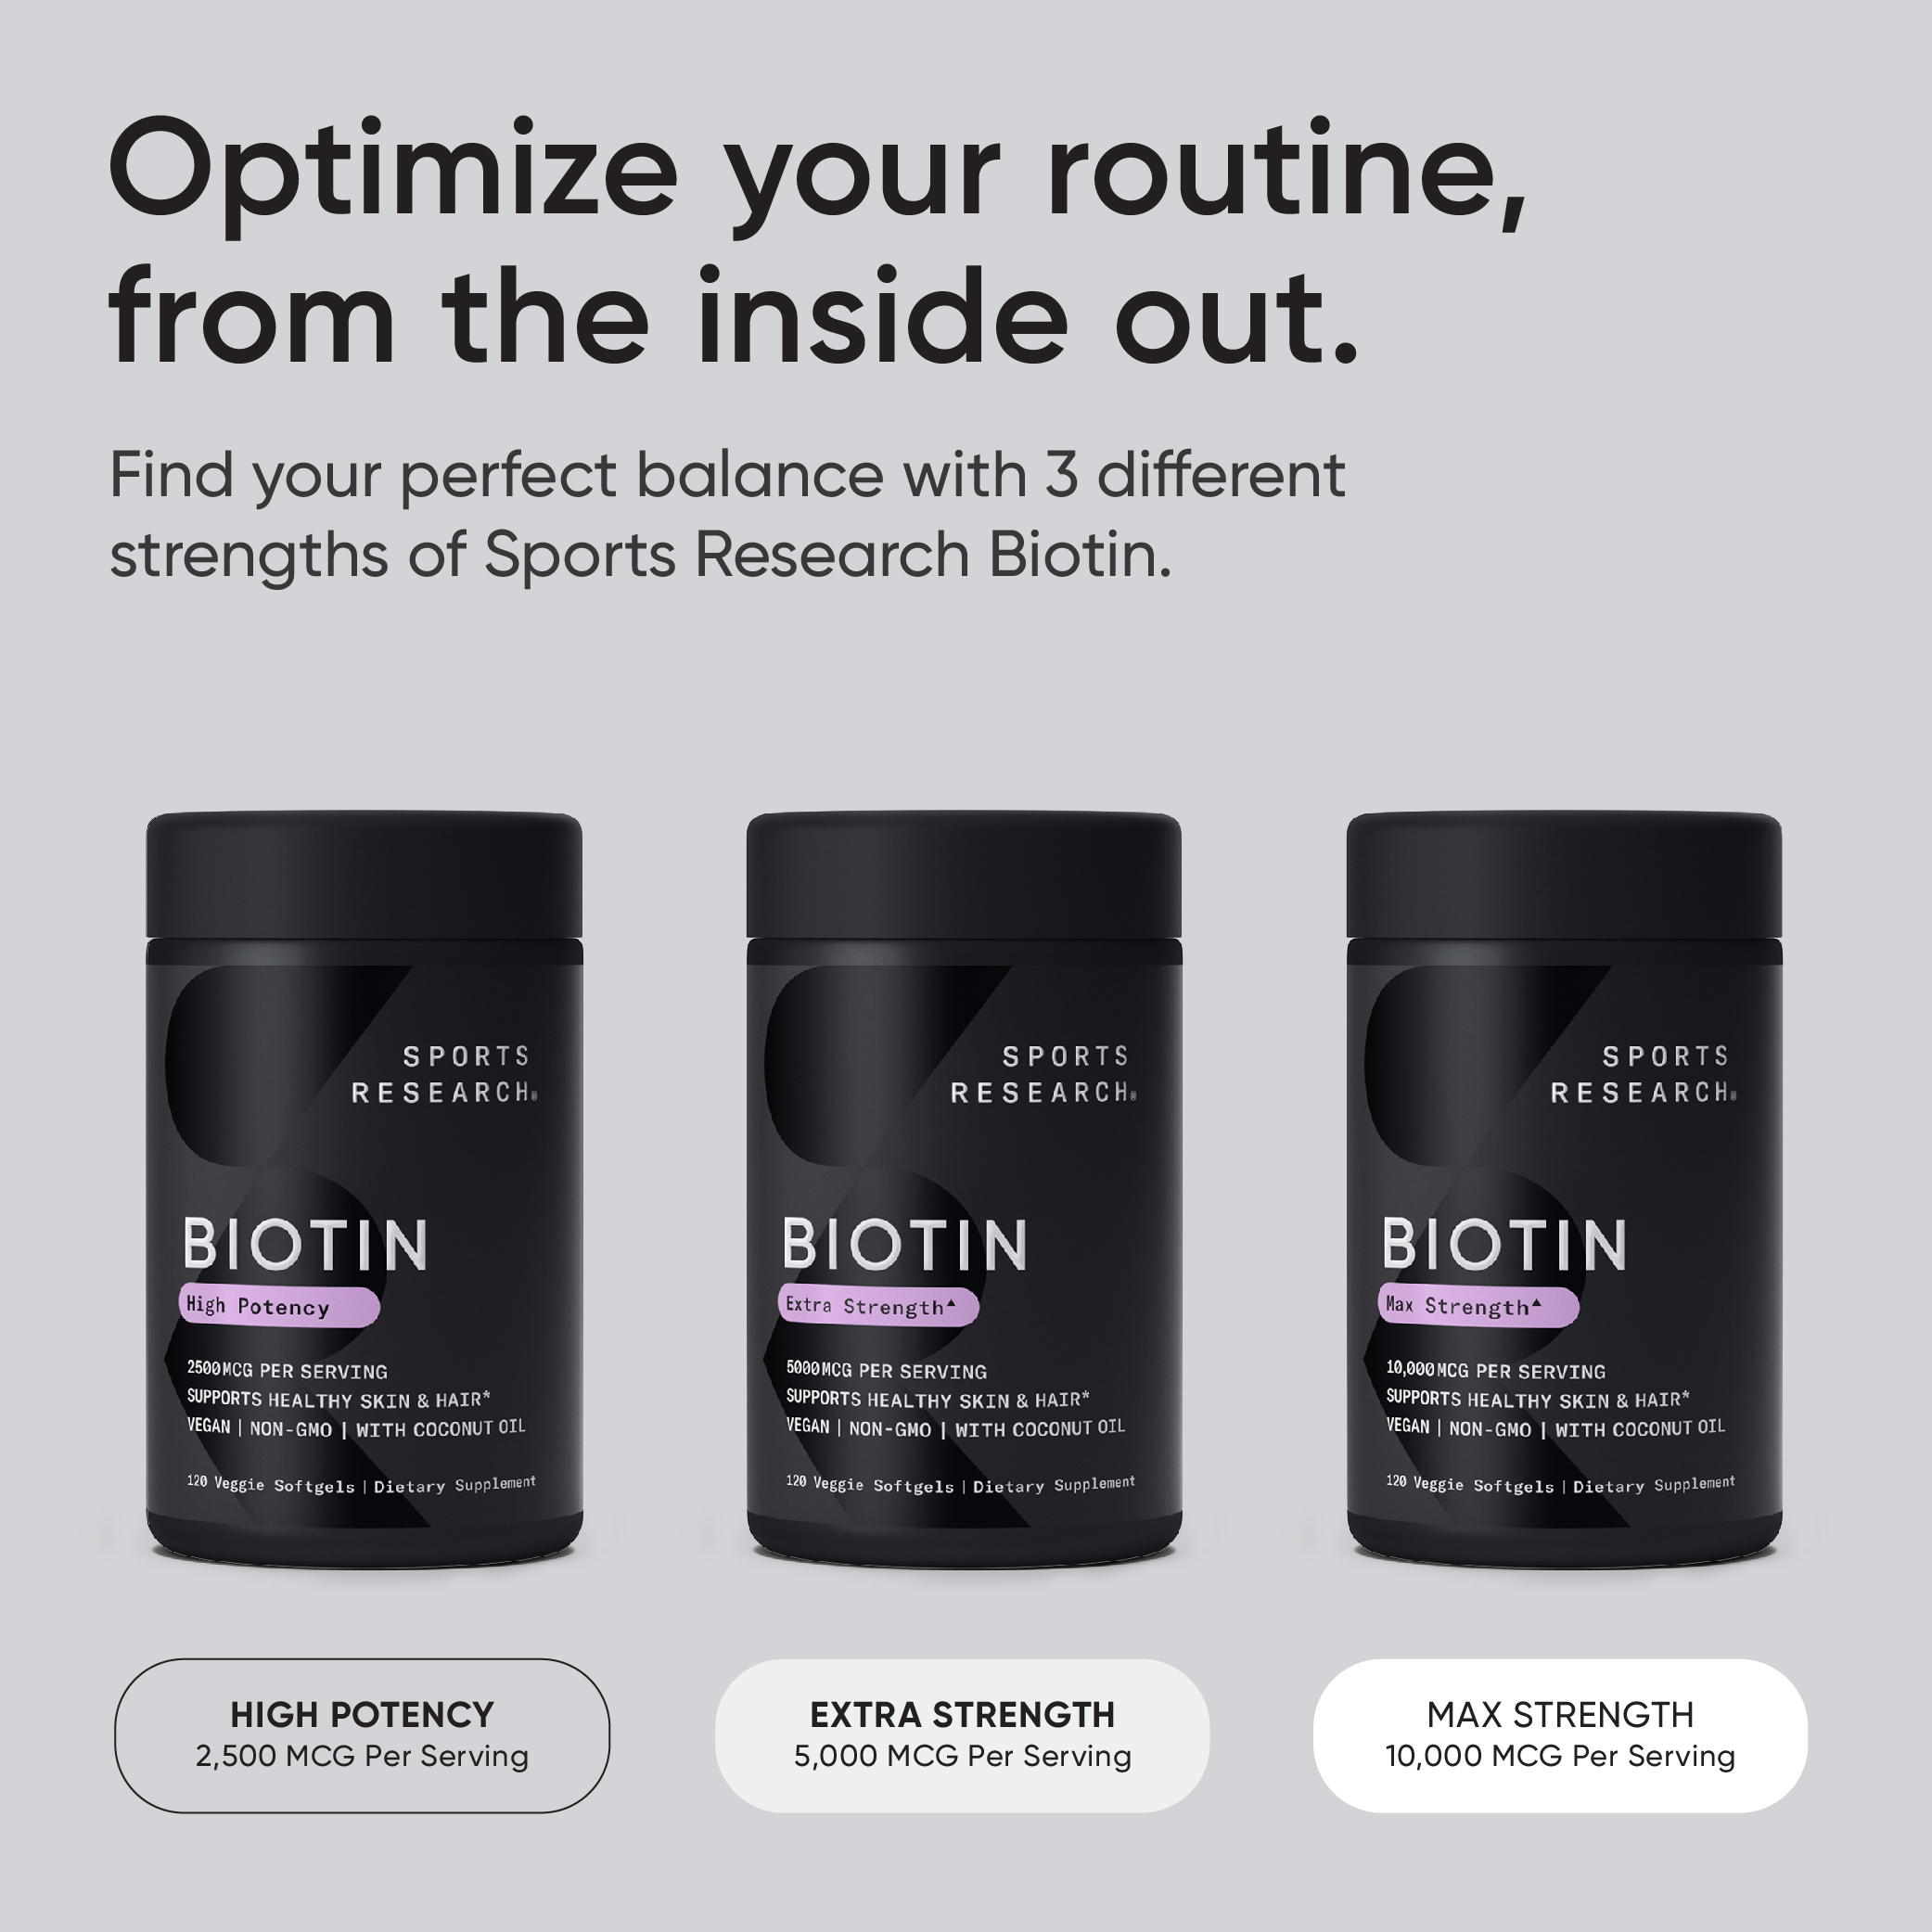 Sports Research Biotin with Coconut Oil, 10,000 mcg, 120 Veggie Softgels - image 5 of 7